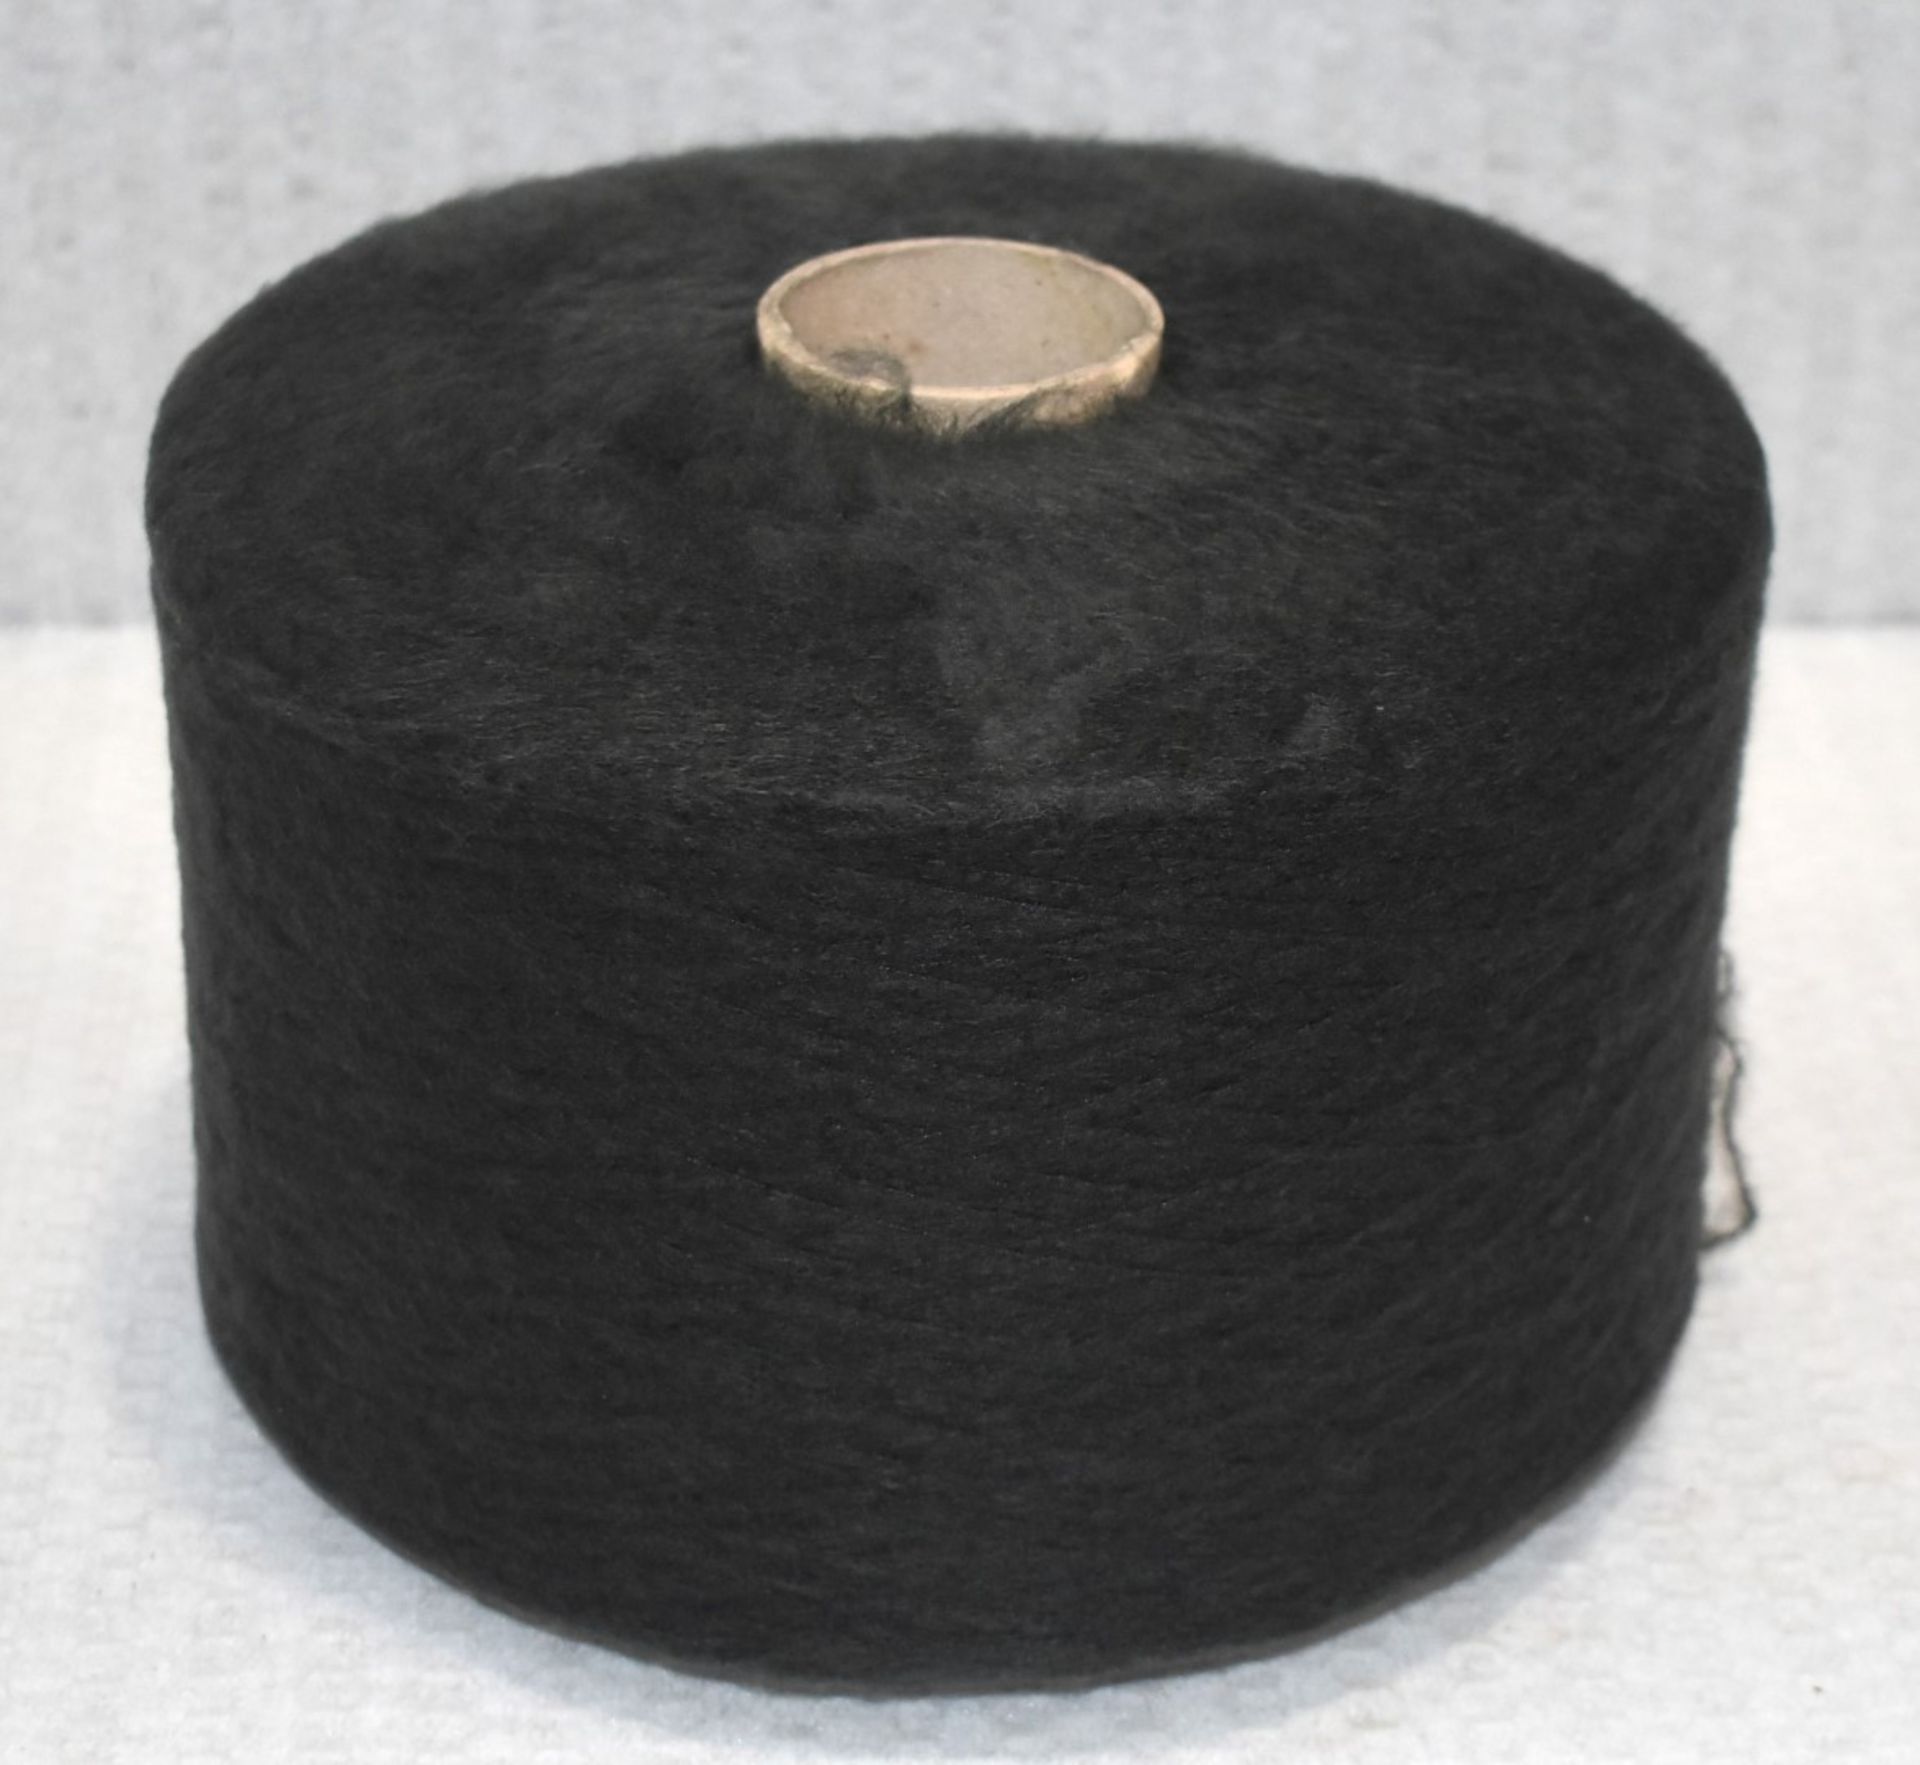 36 x Cones of 1/7,5 Lagona Knitting Yarn - Charcoal - Approx Weight: 2,300g - New Stock ABL Yarn - Image 6 of 11